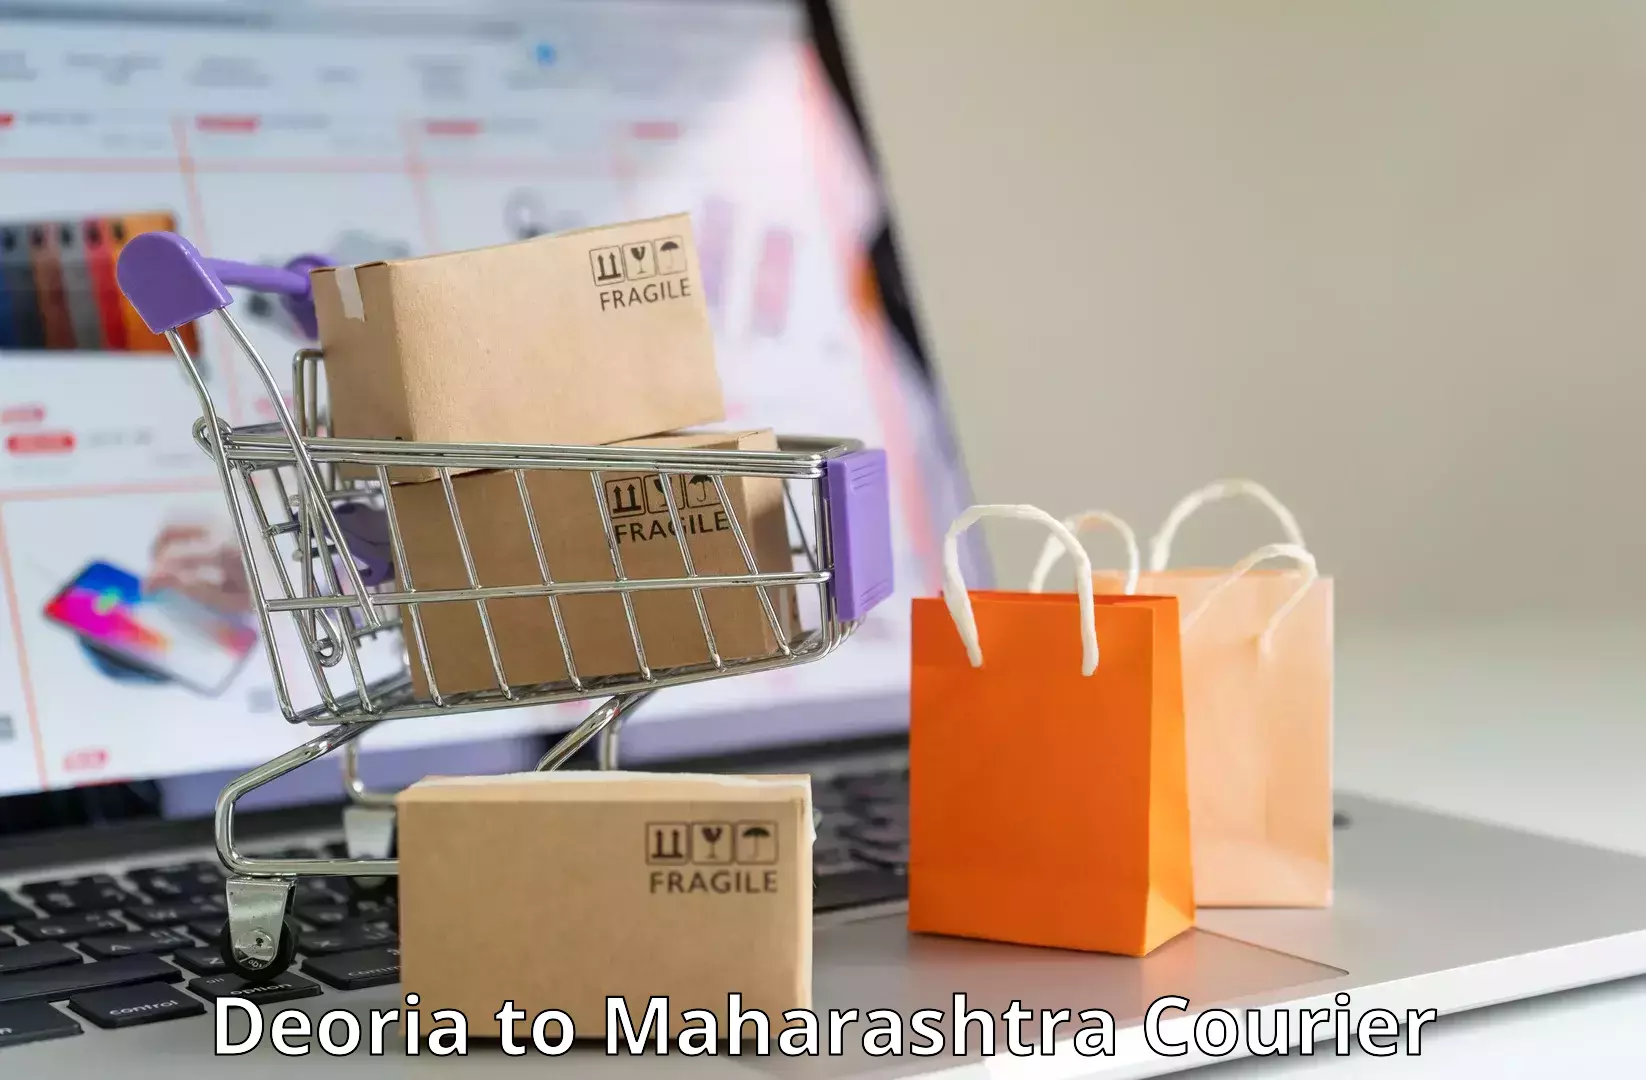 Automated shipping processes Deoria to Loni Ahmednagar